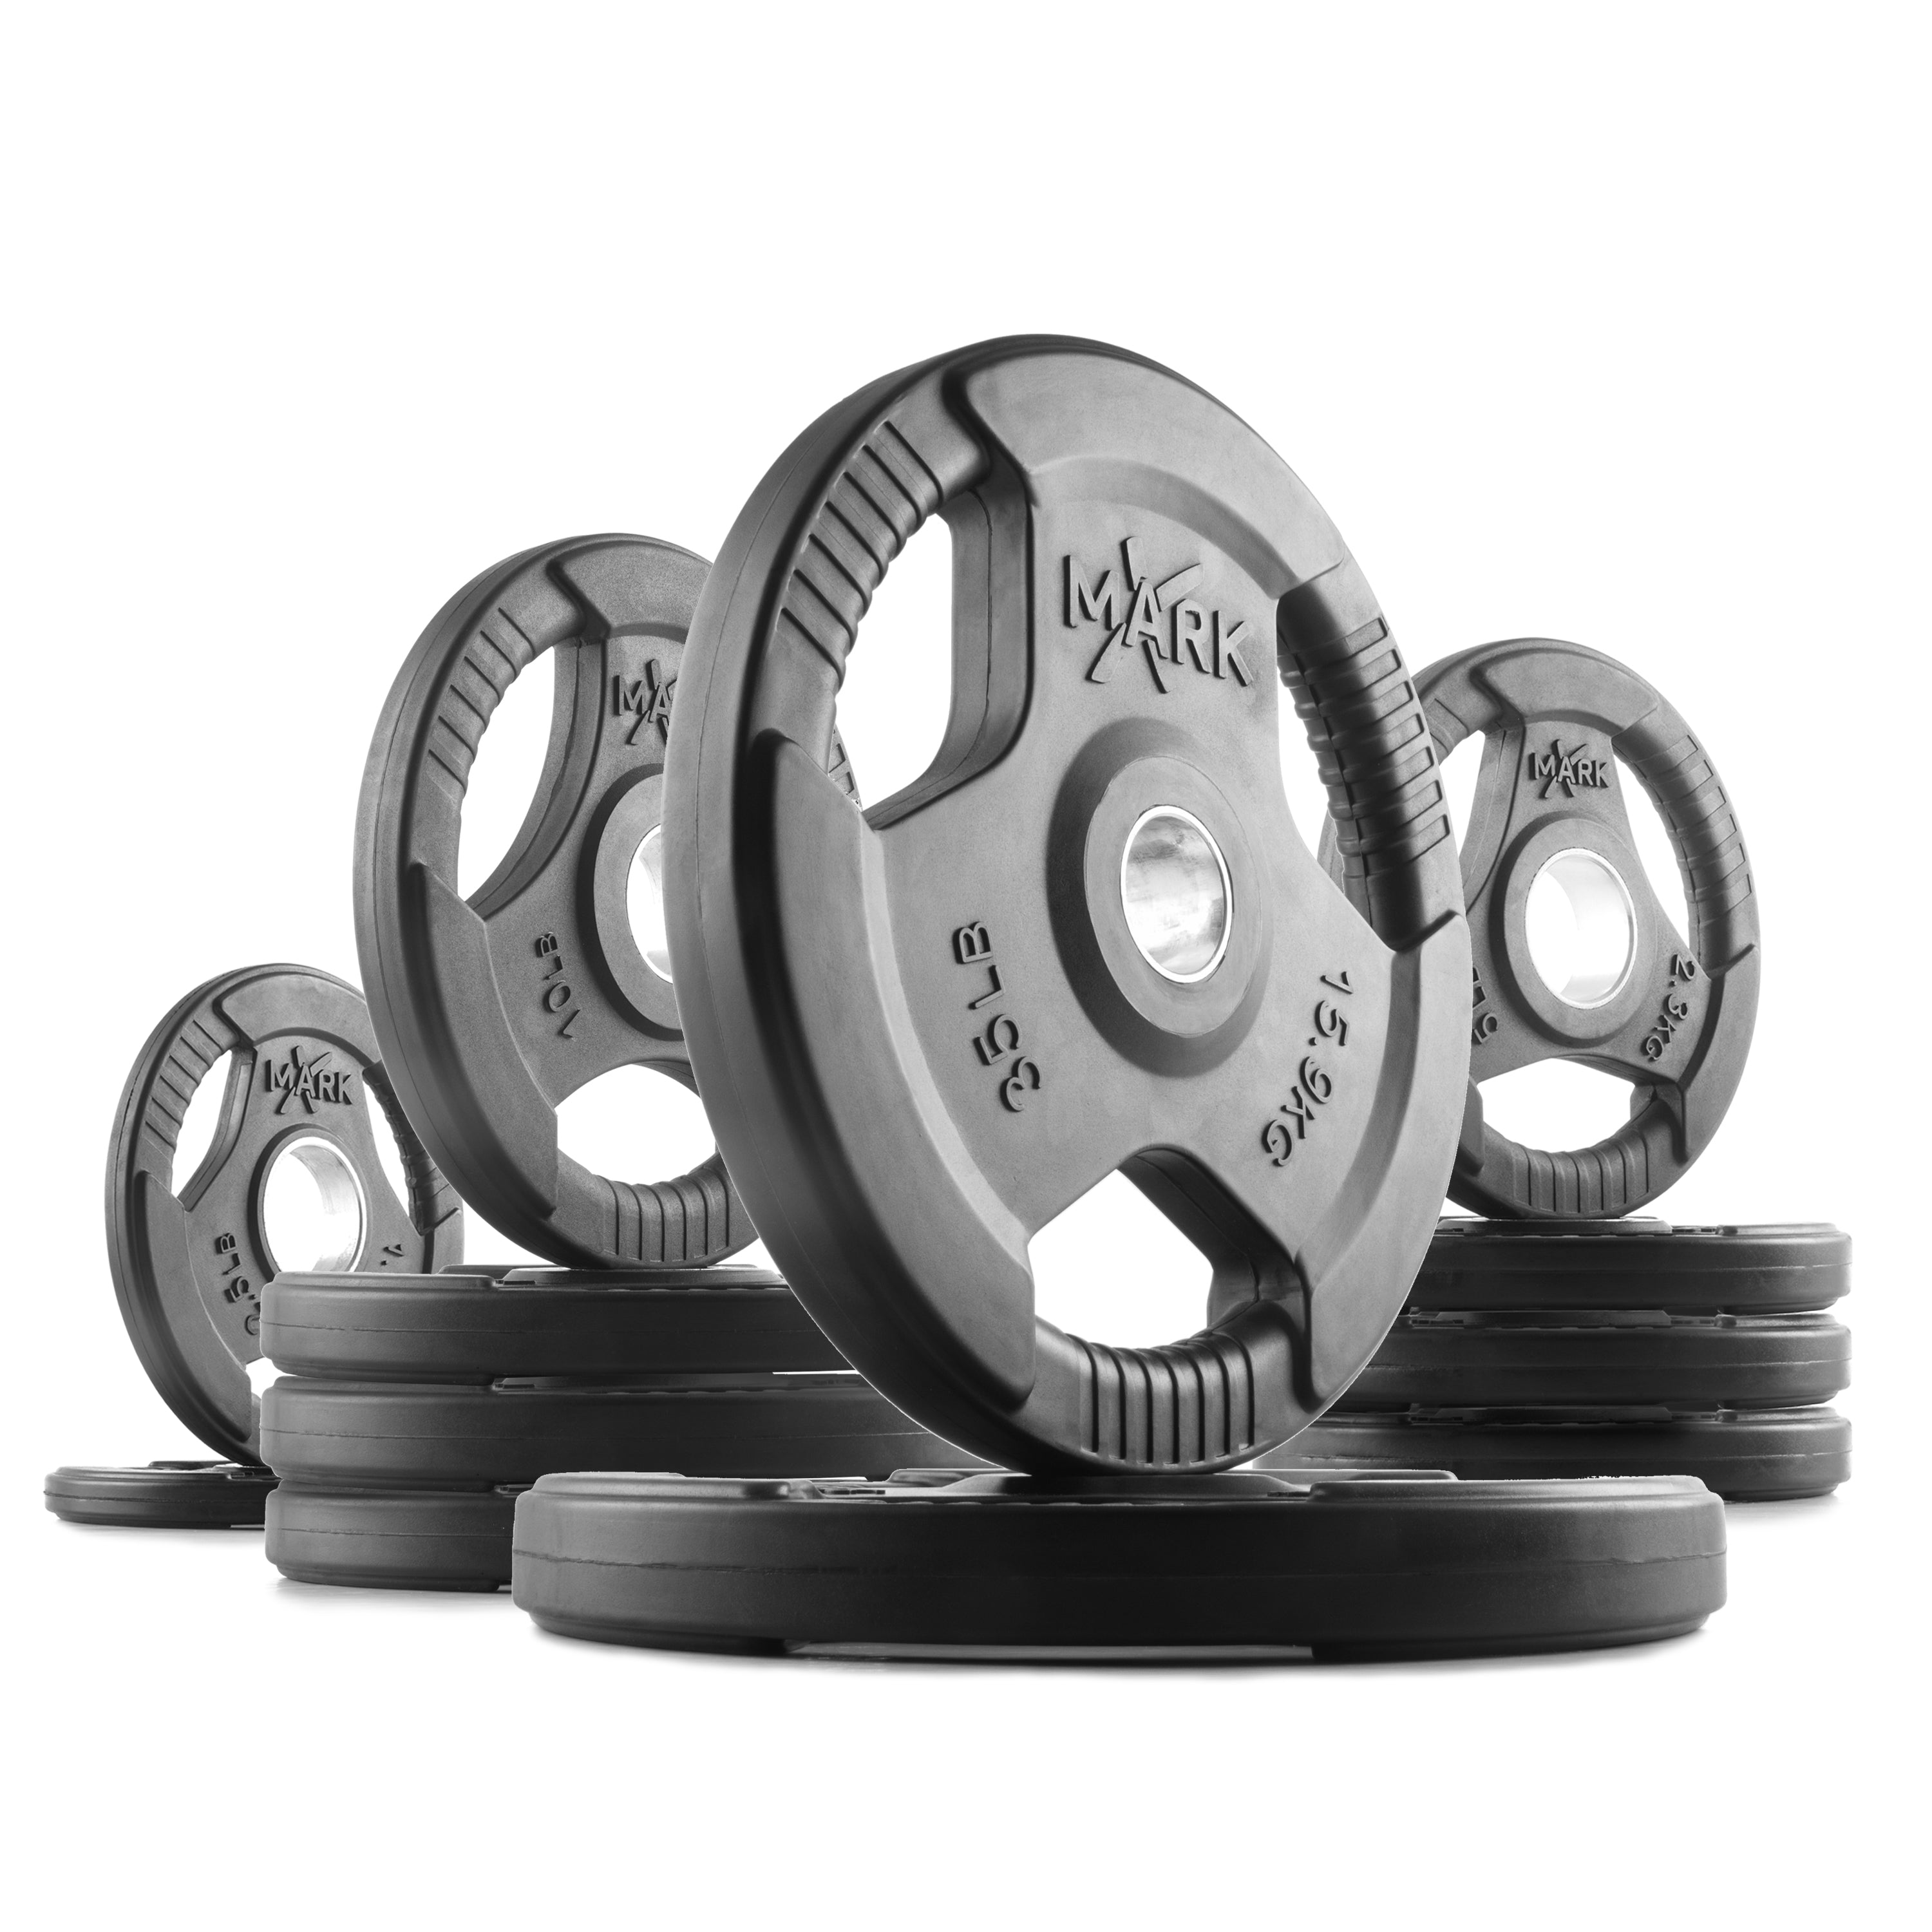 Tri Grip 135 lb Set Olympic Weights